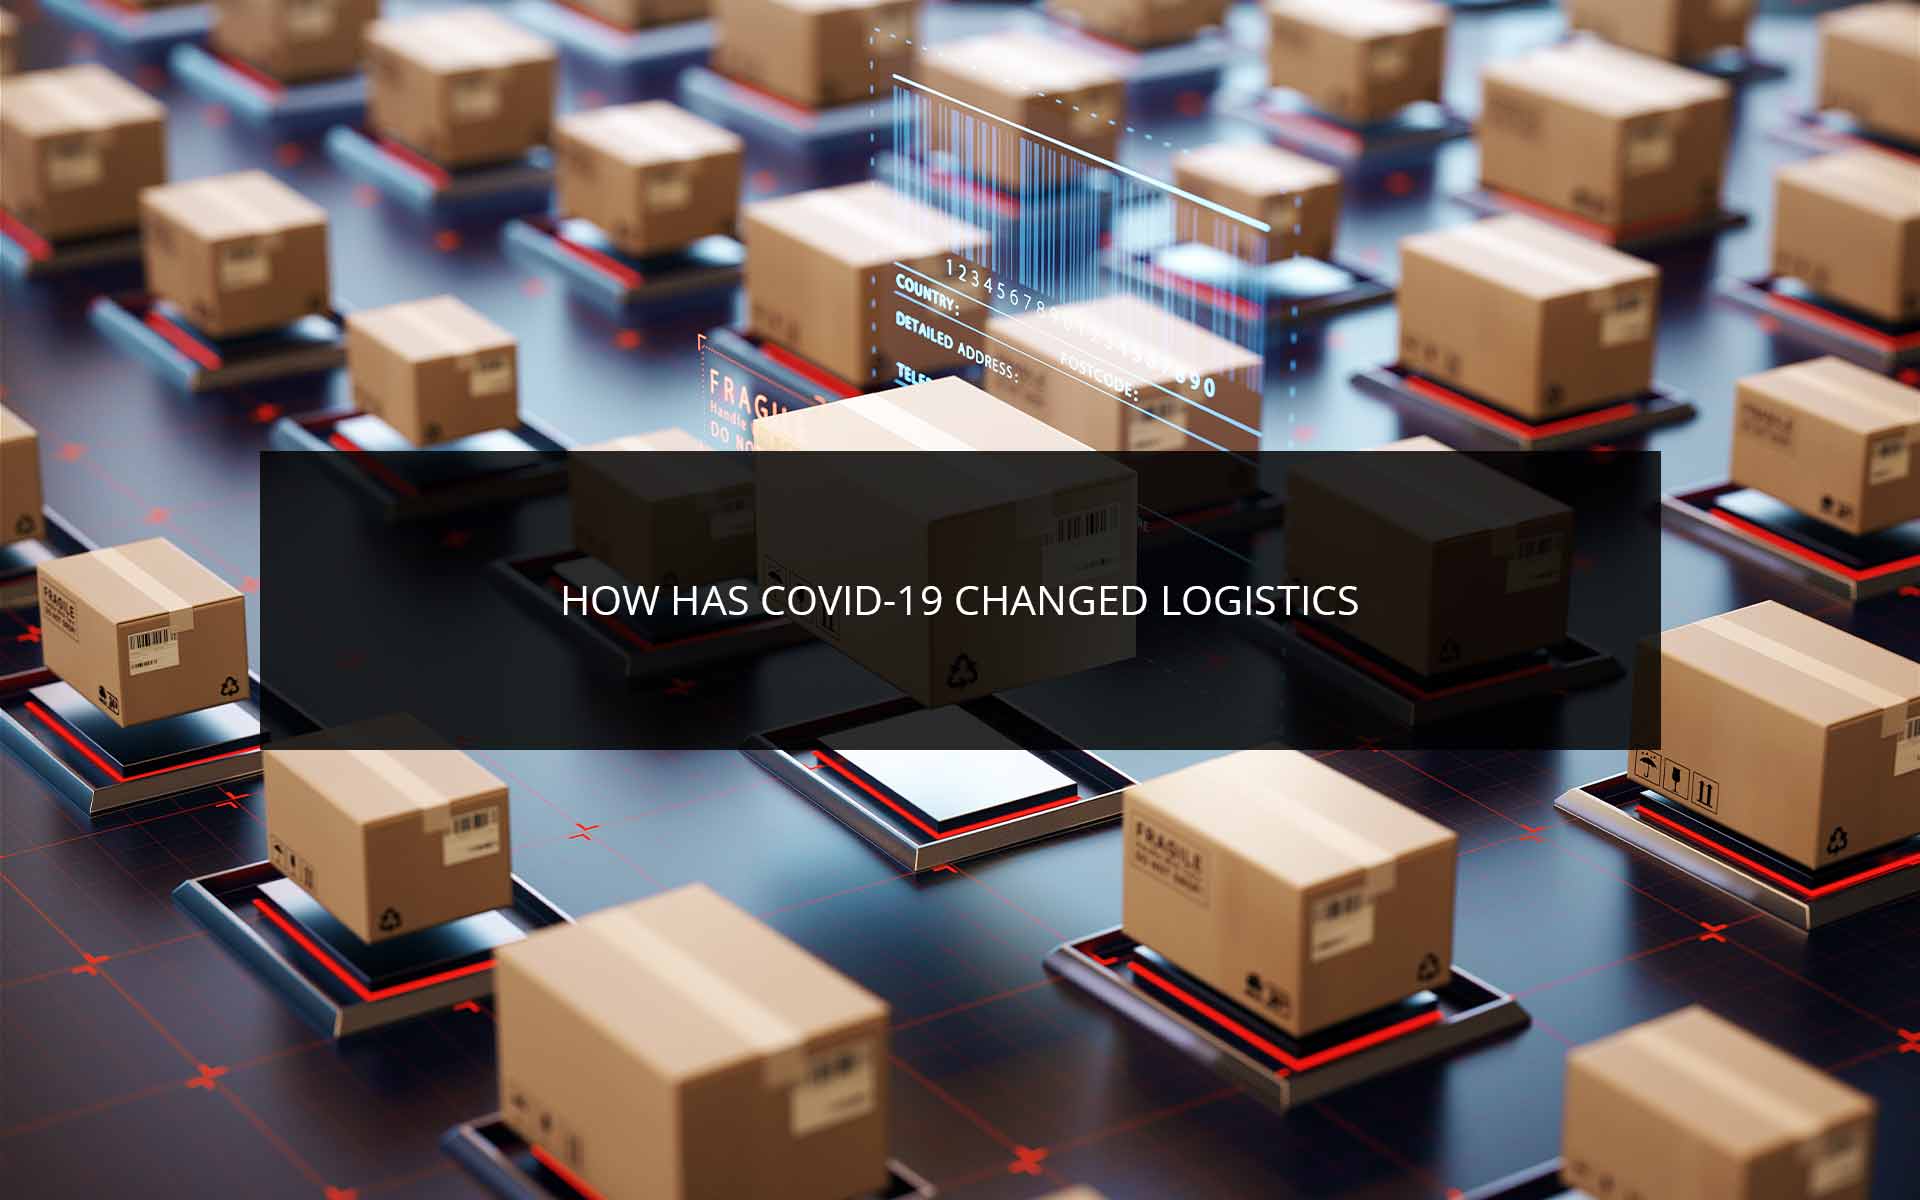 How Has COVID-19 Changed Logistics?